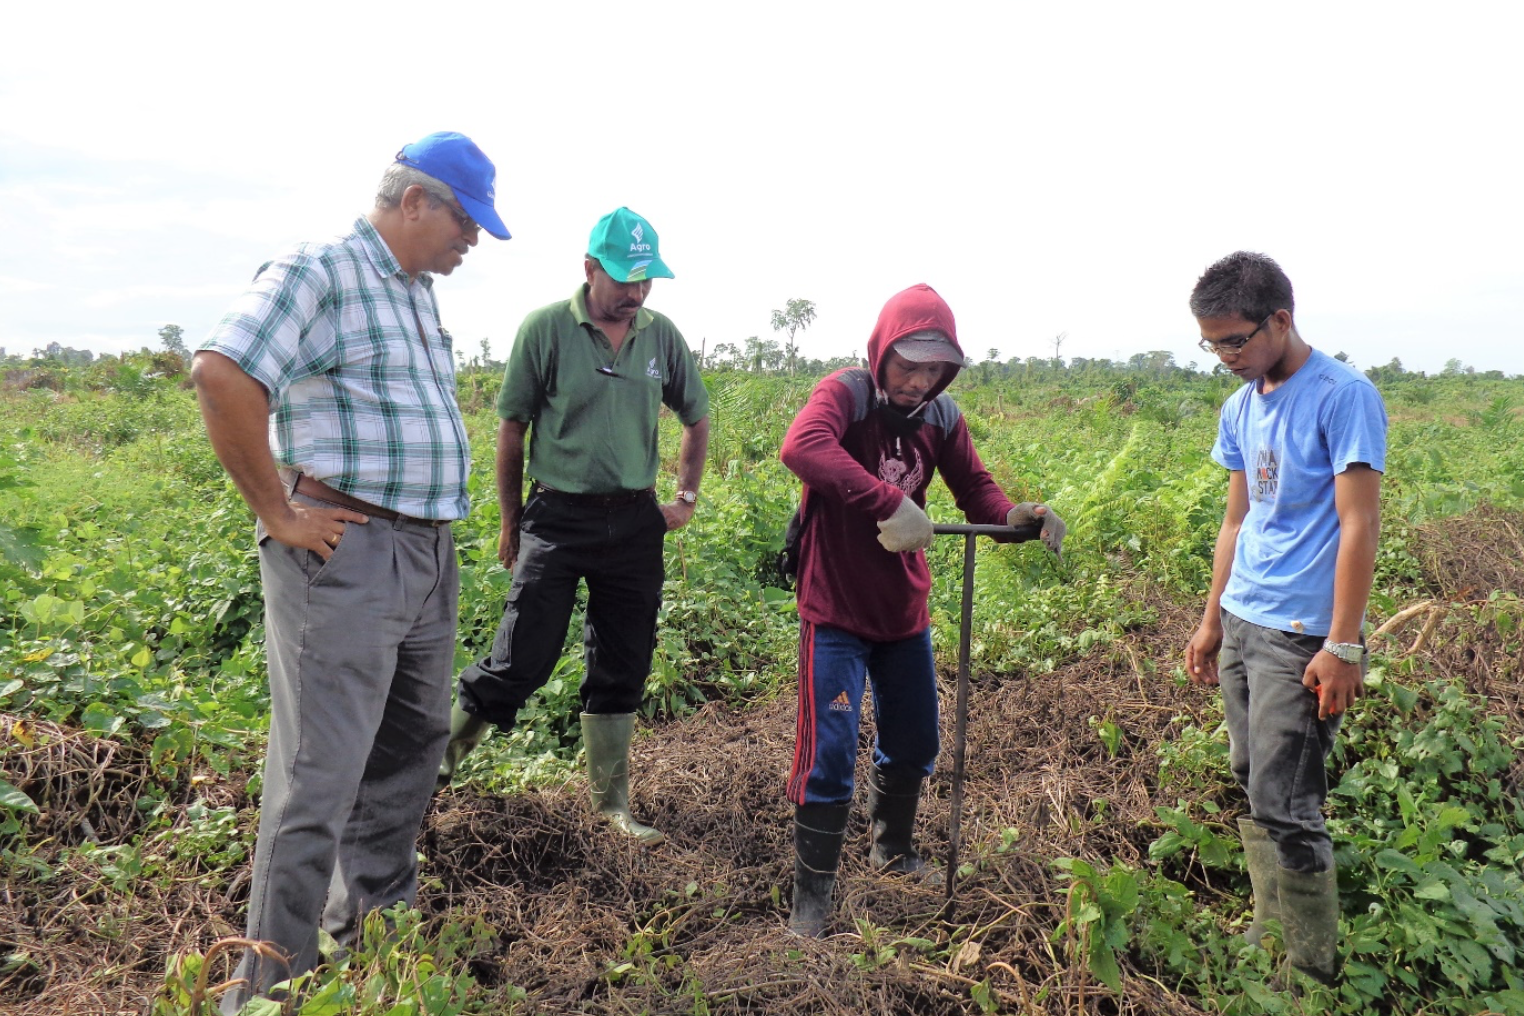   Soil Suitability Advisory  – Soil sampling to determine soil suitability of green field for oil palm cultivation. 